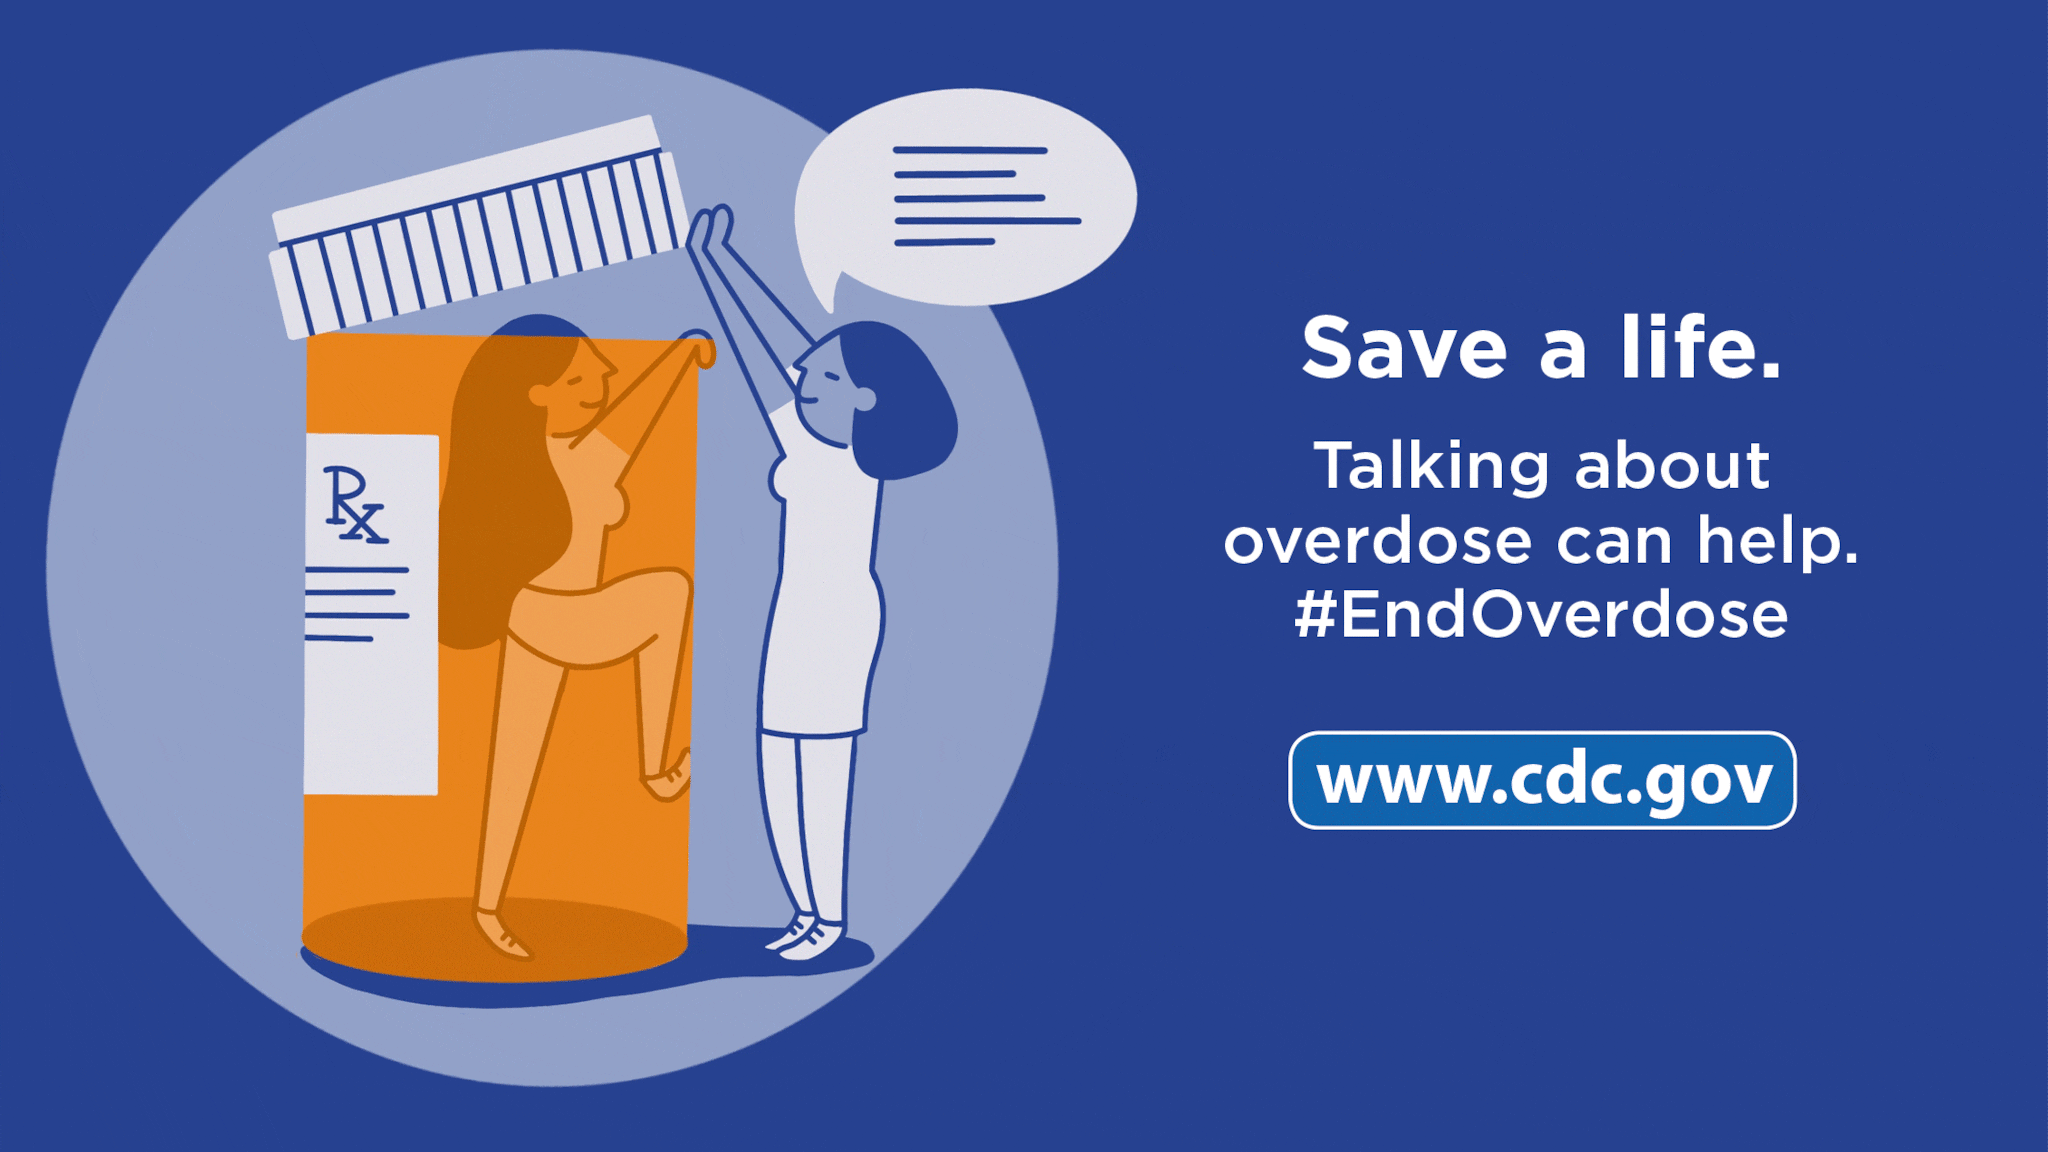 Save a life. Talking about oversode can help.